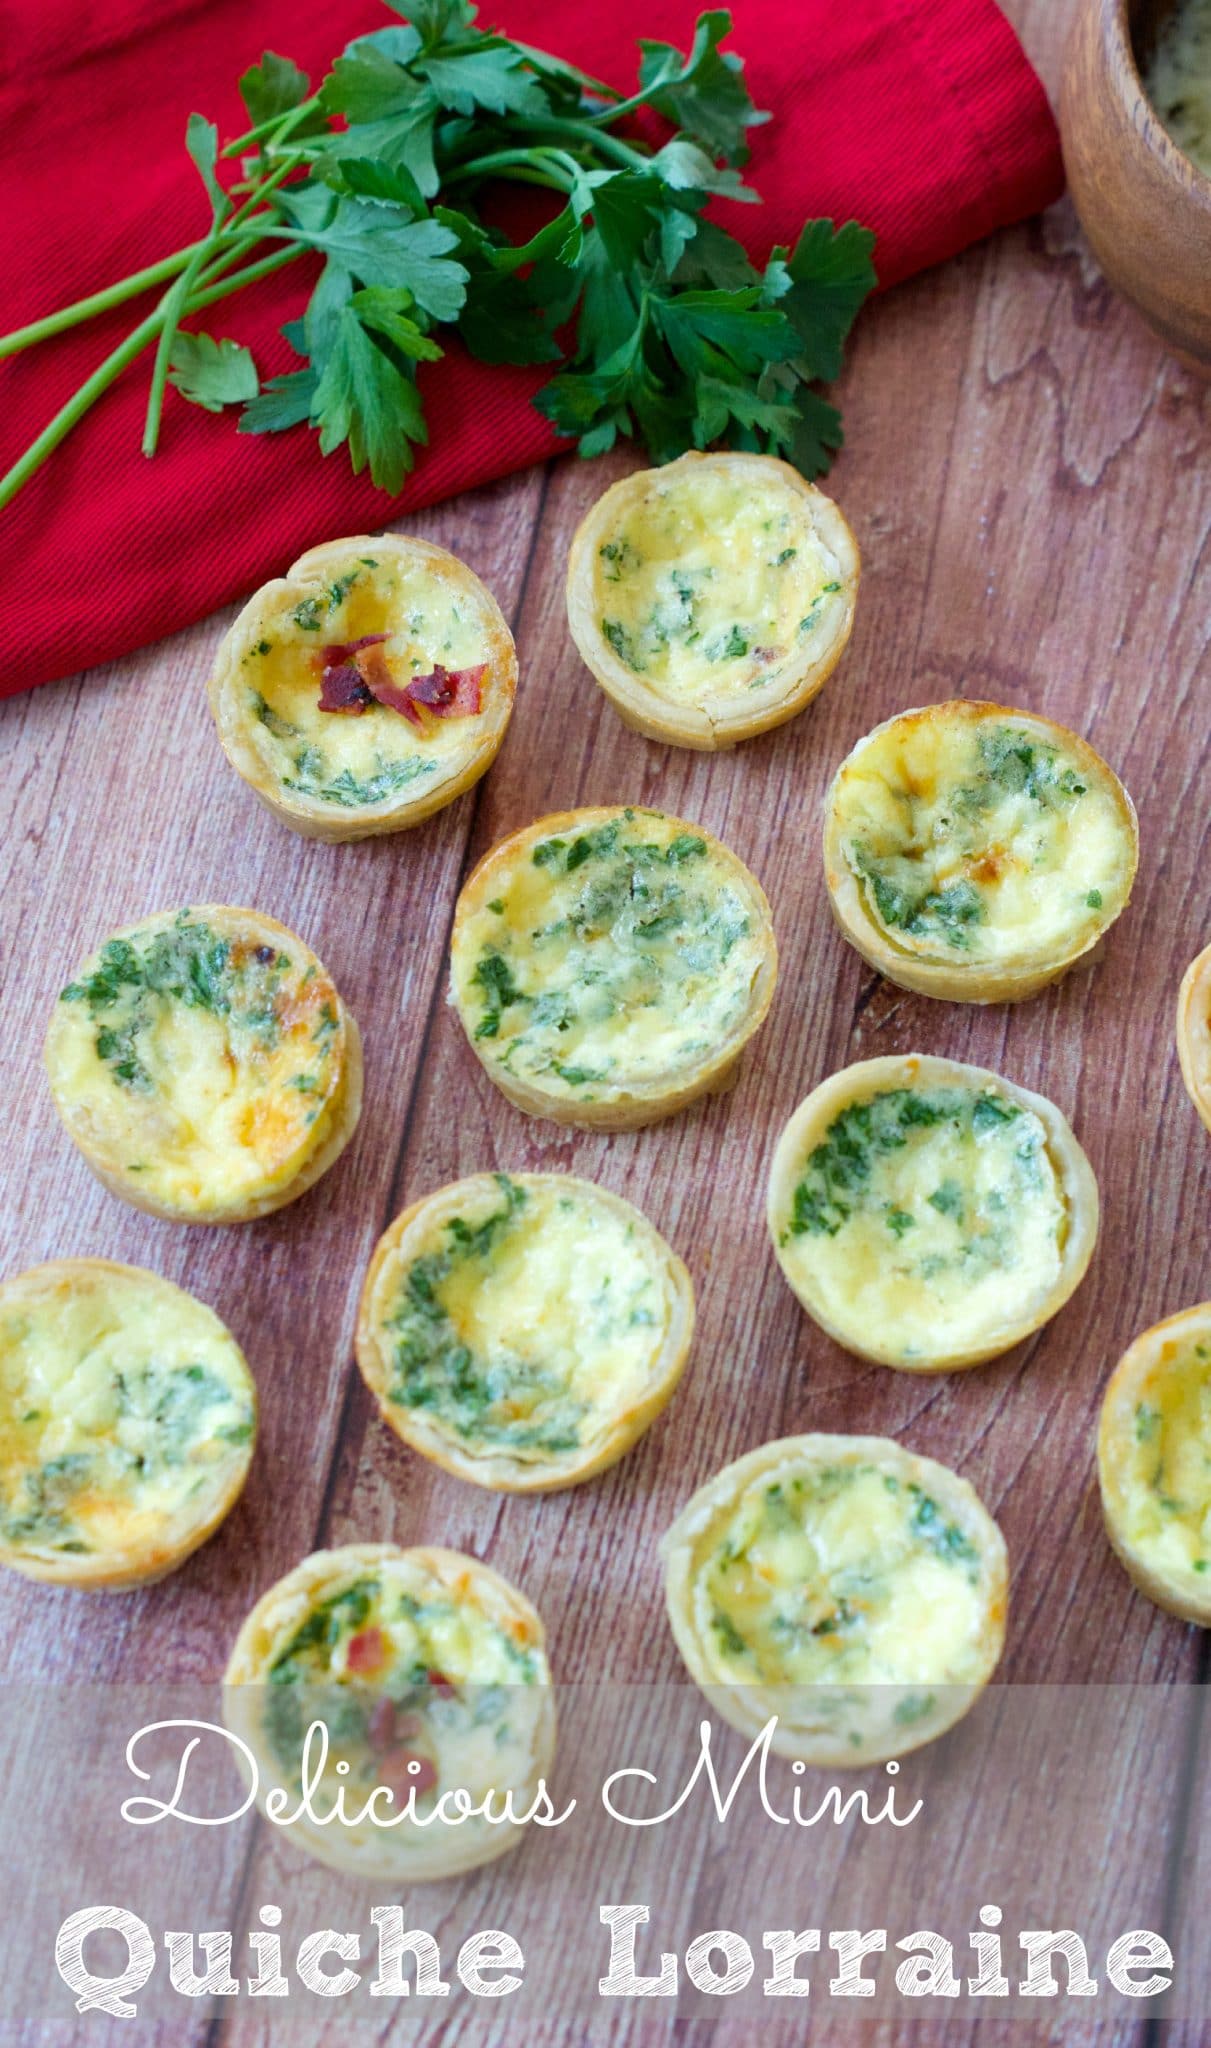 This delicious Mini Quiche Lorraine Recipe tastes just like the ones in Paris and is easy to make. The perfect appetizer for parties and celebrations.